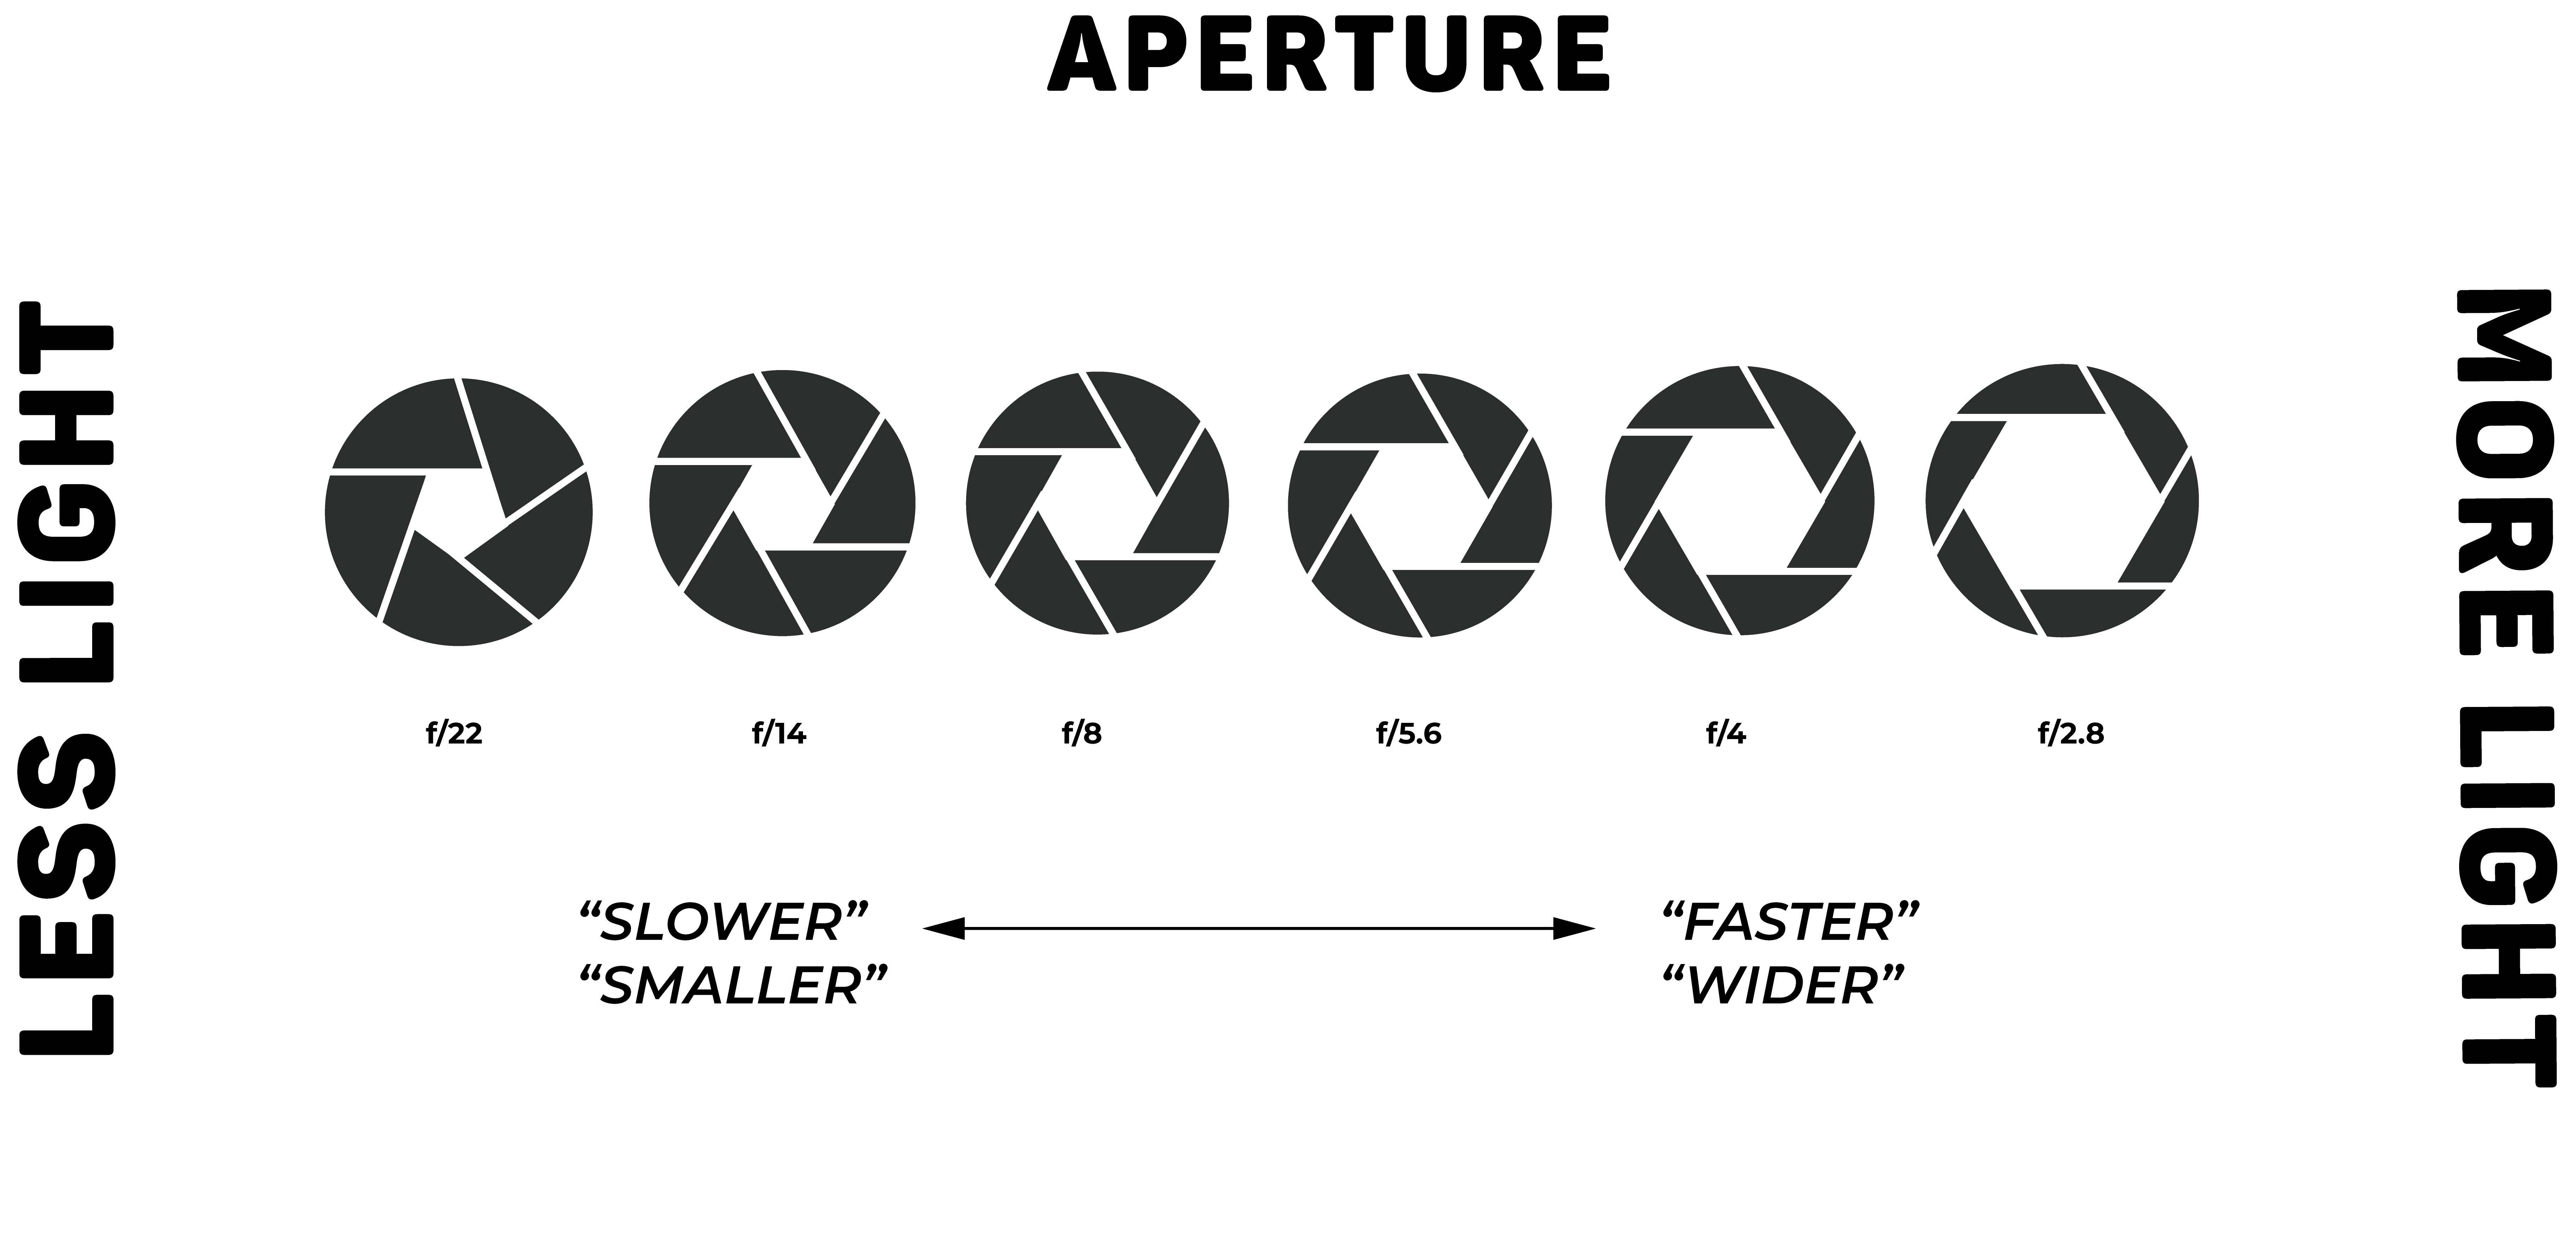 How to Choose the Best Aperture Every Time